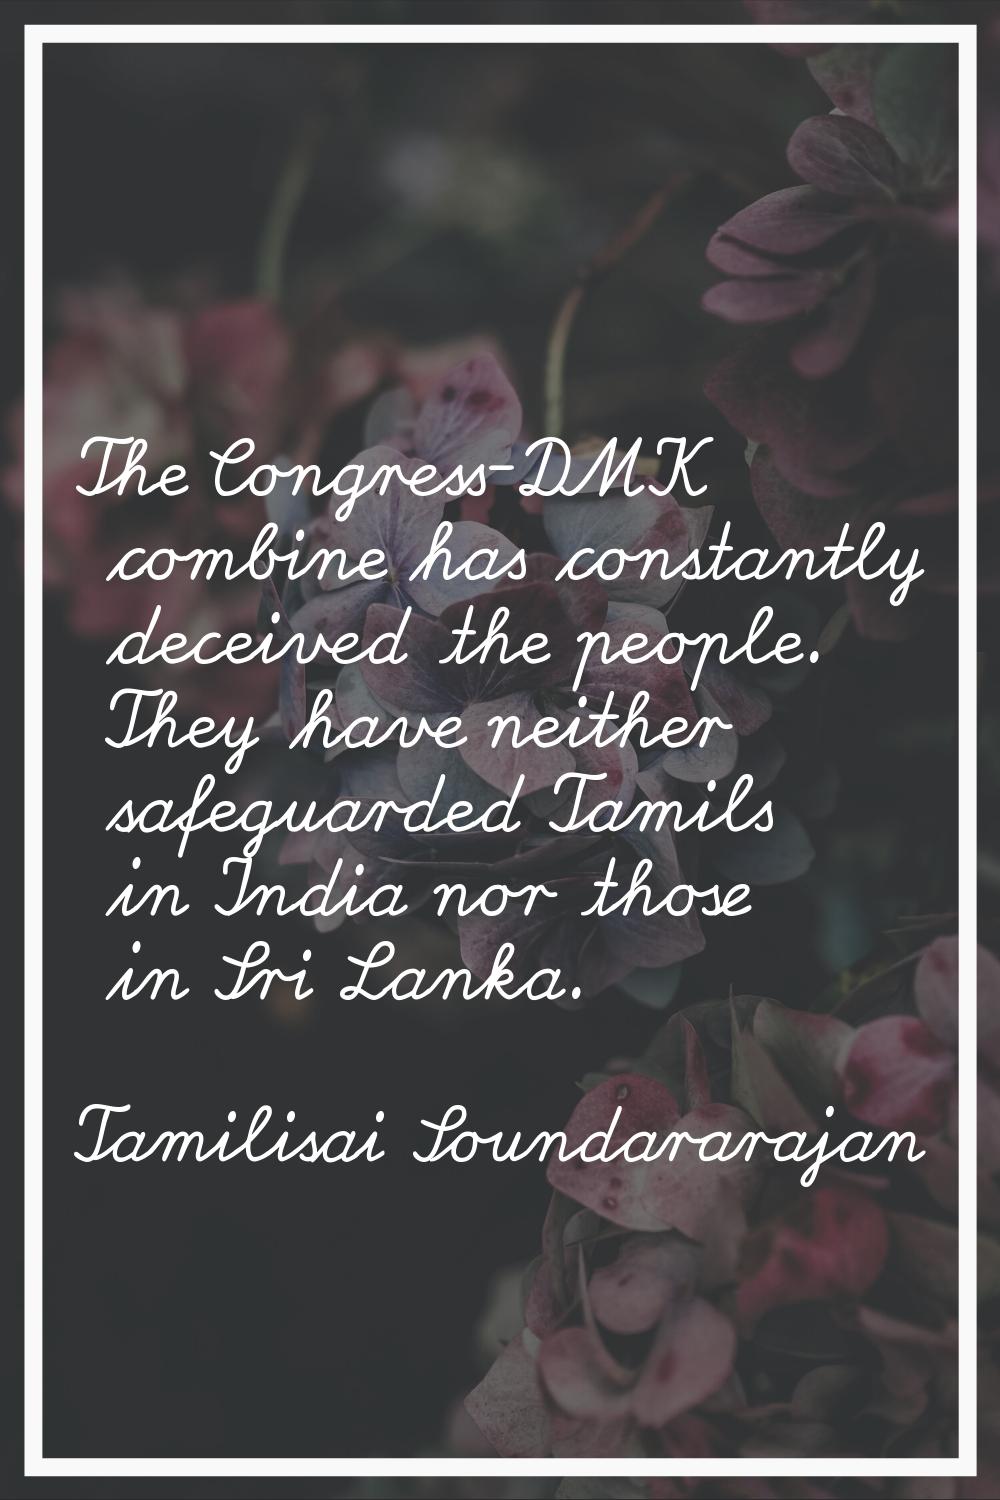 The Congress-DMK combine has constantly deceived the people. They have neither safeguarded Tamils i